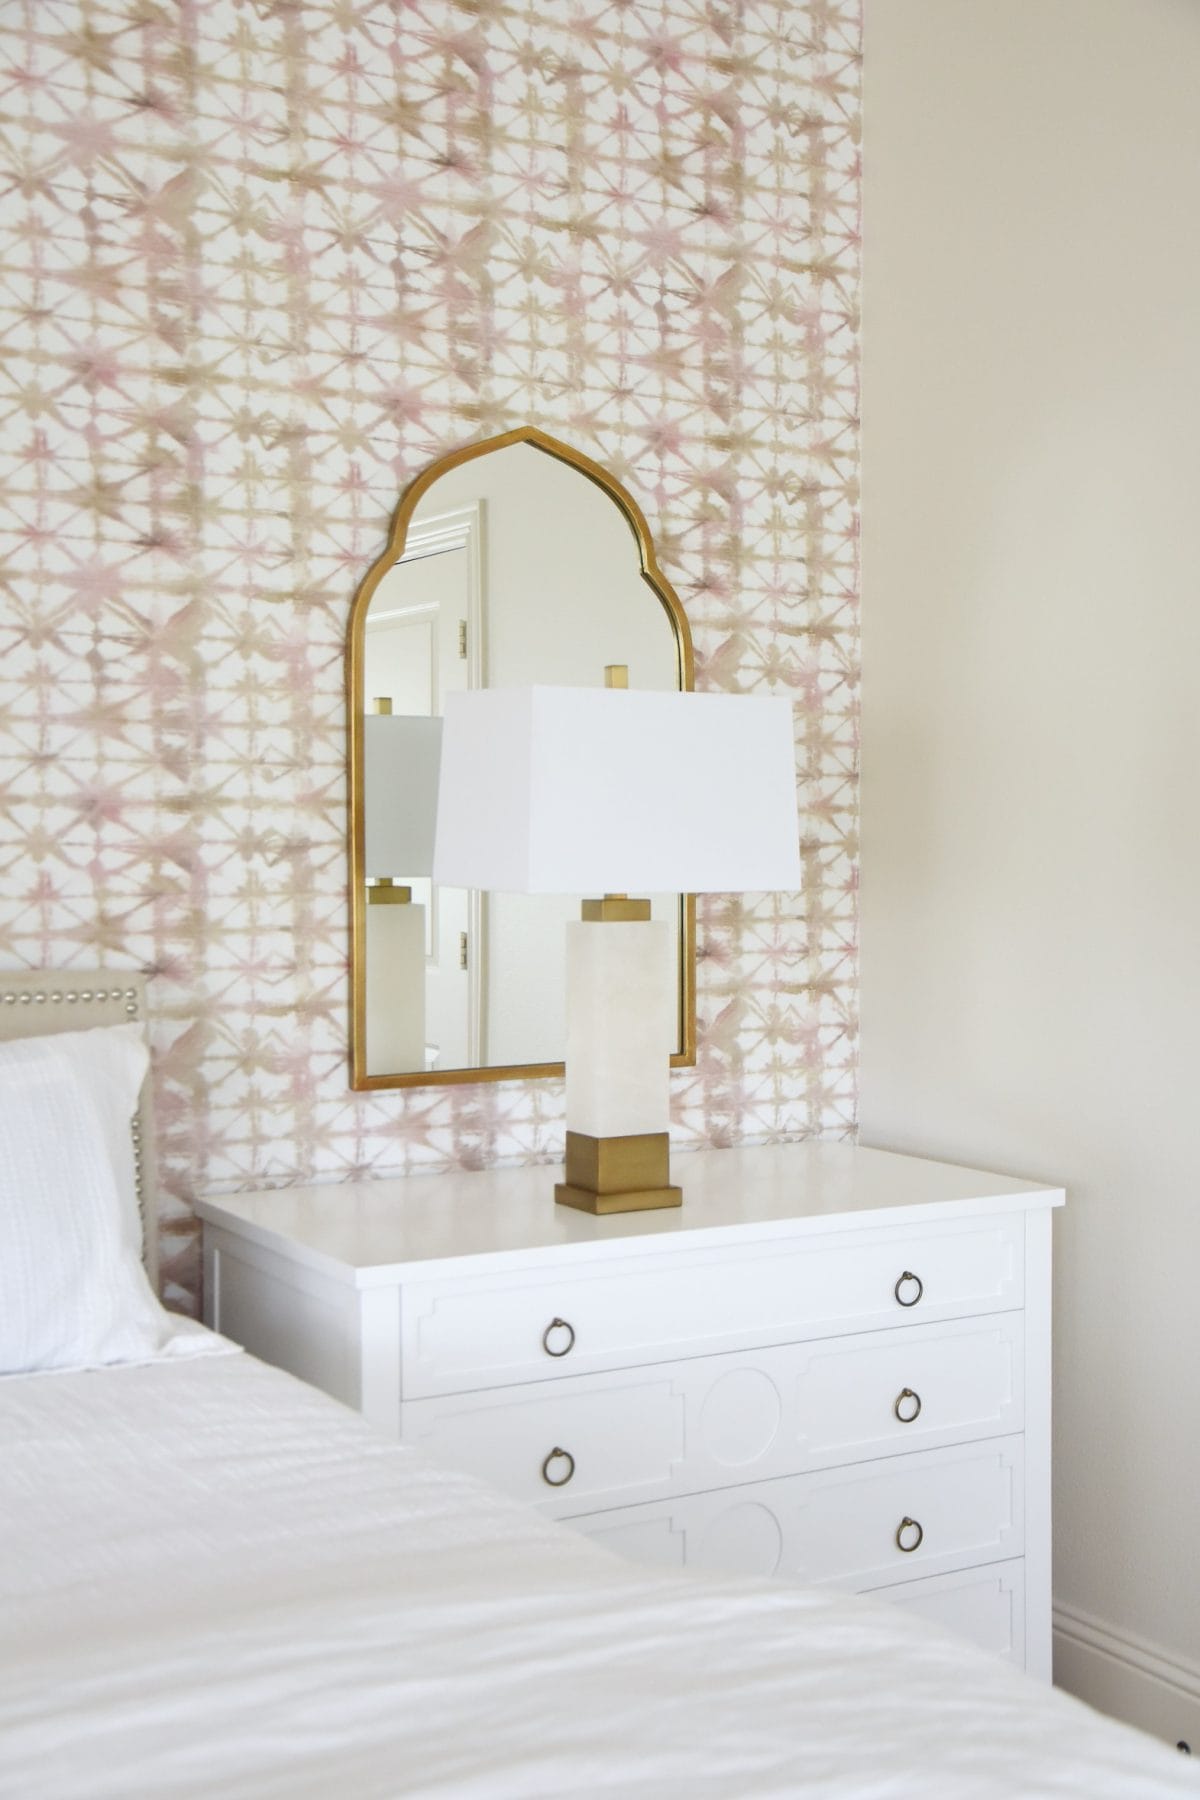 Bedroom lamp and gold arched mirror 